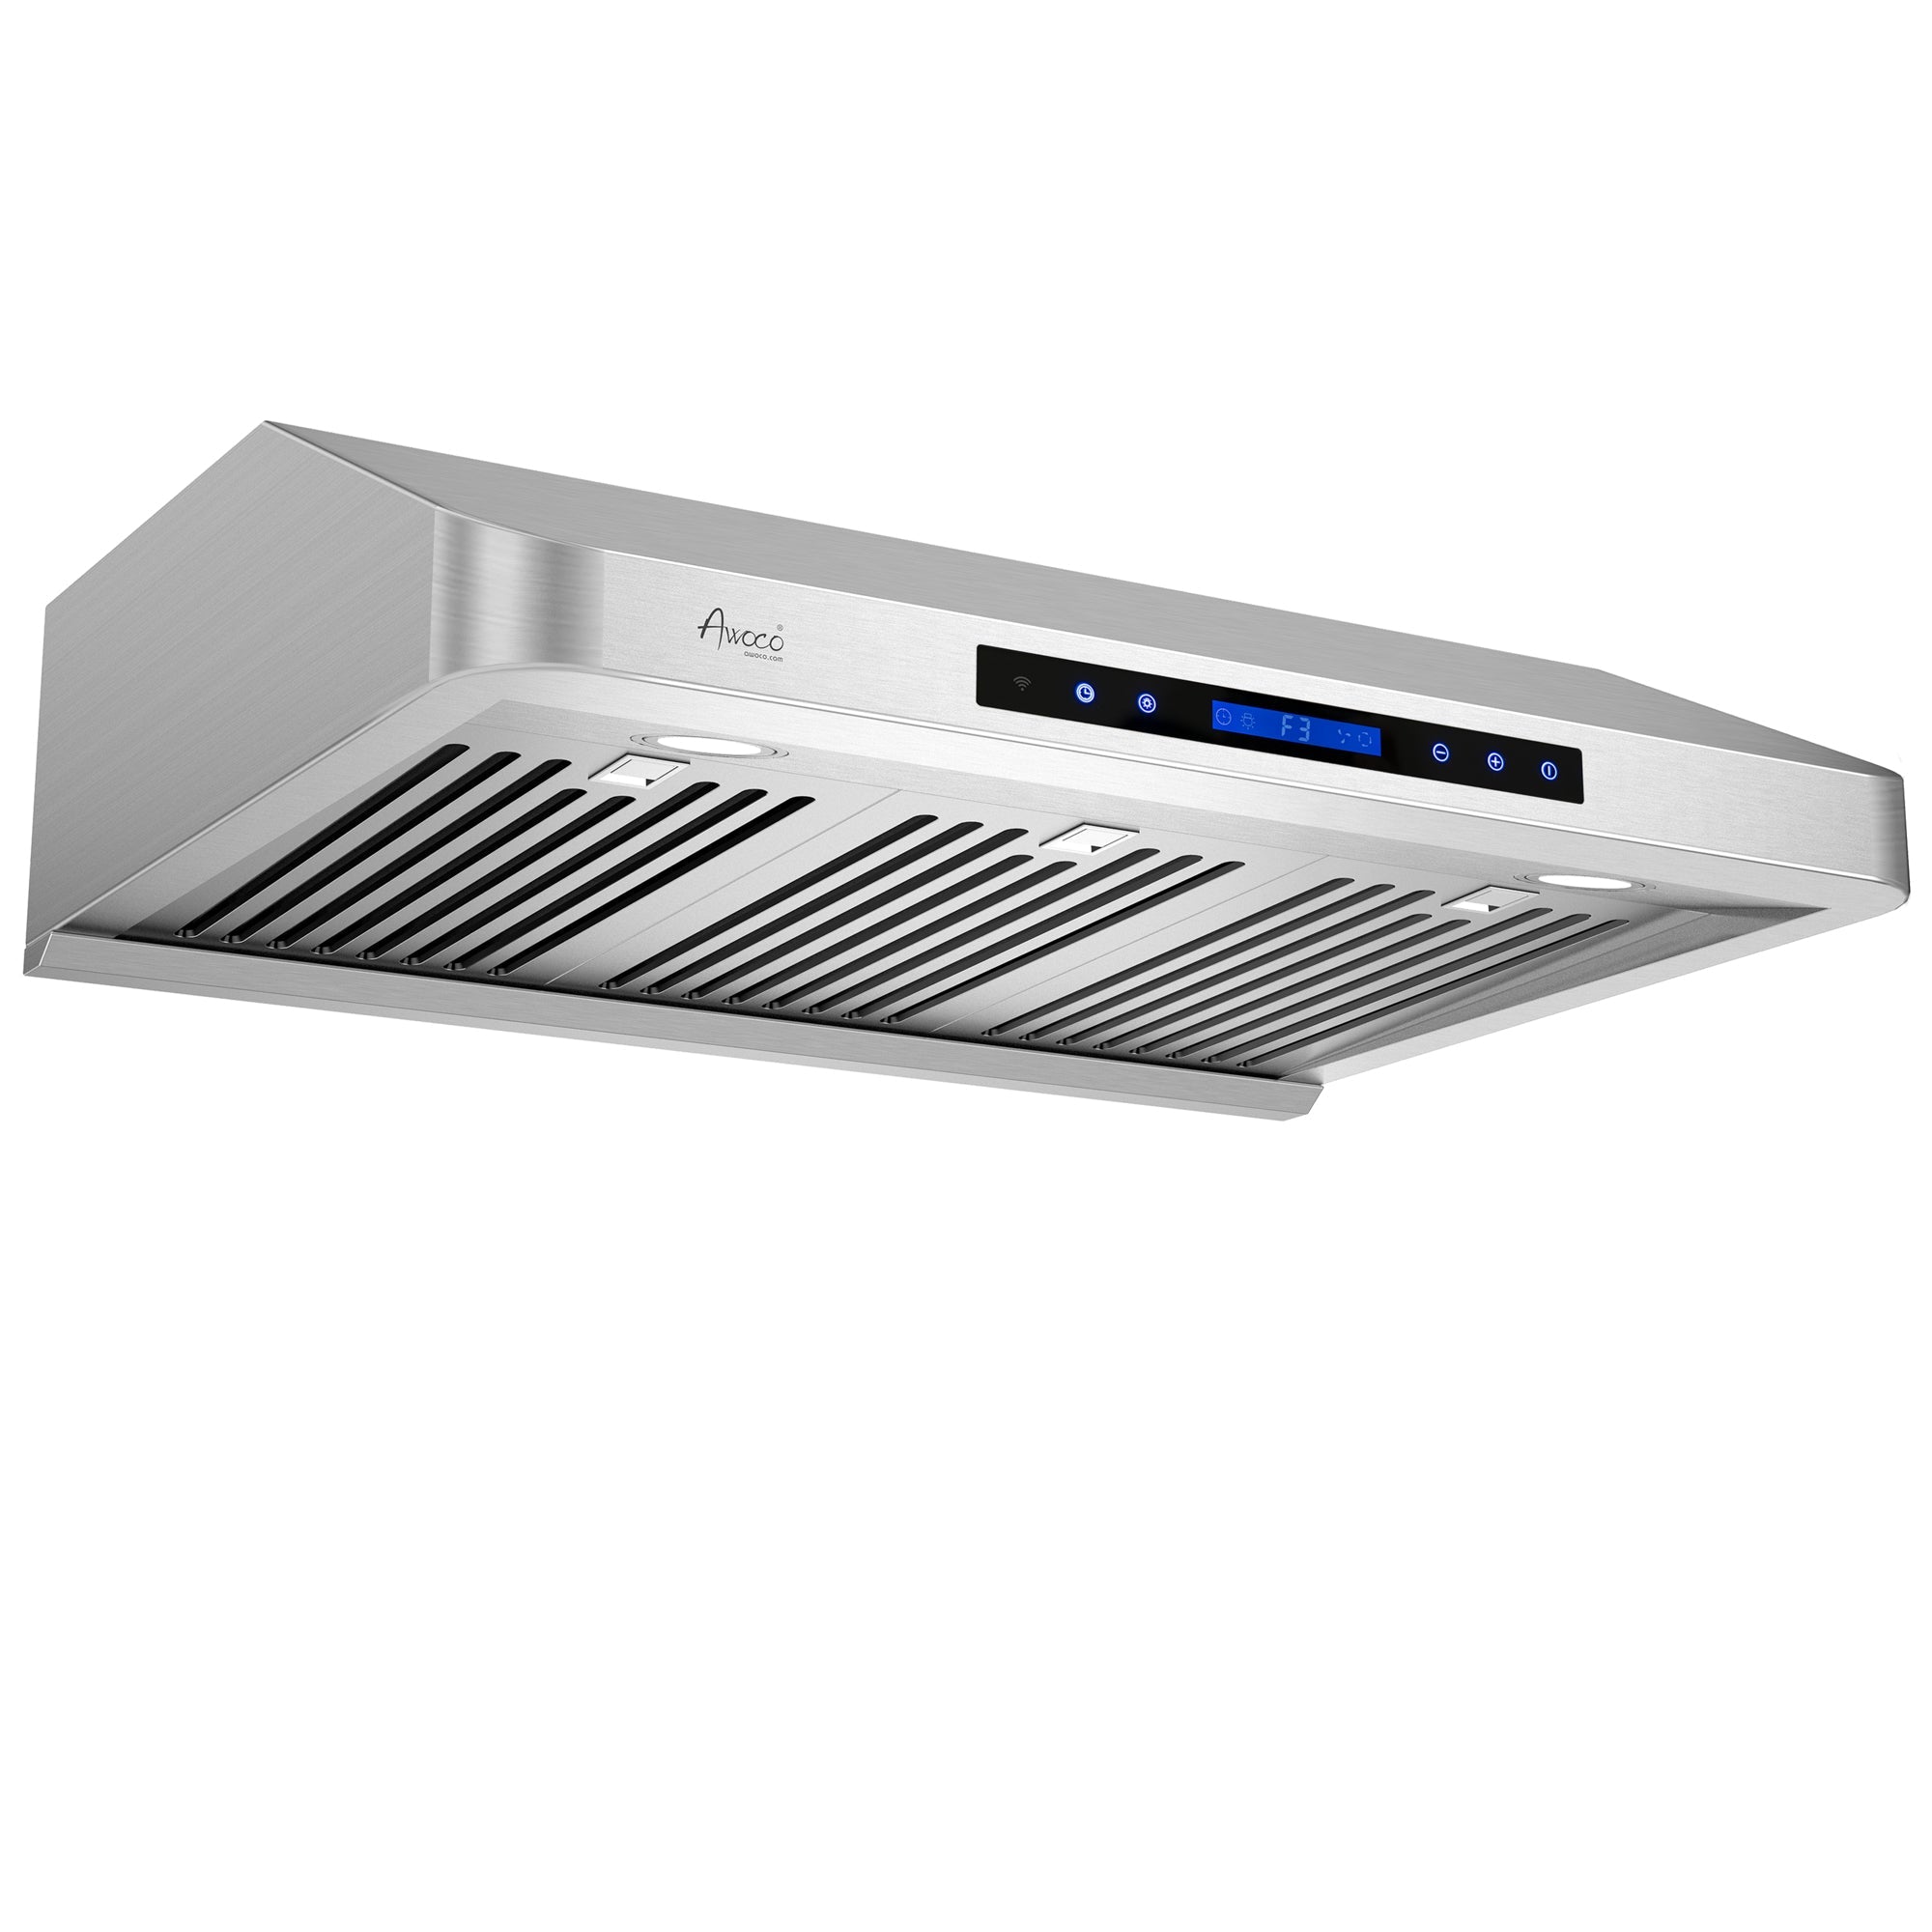 [Refurbished] Awoco RH-S10-36S Under Cabinet Supreme 7” High Stainless Steel Range Hood, 4 Speeds, 8” Round Top Vent, 1000CFM, with Remote Control